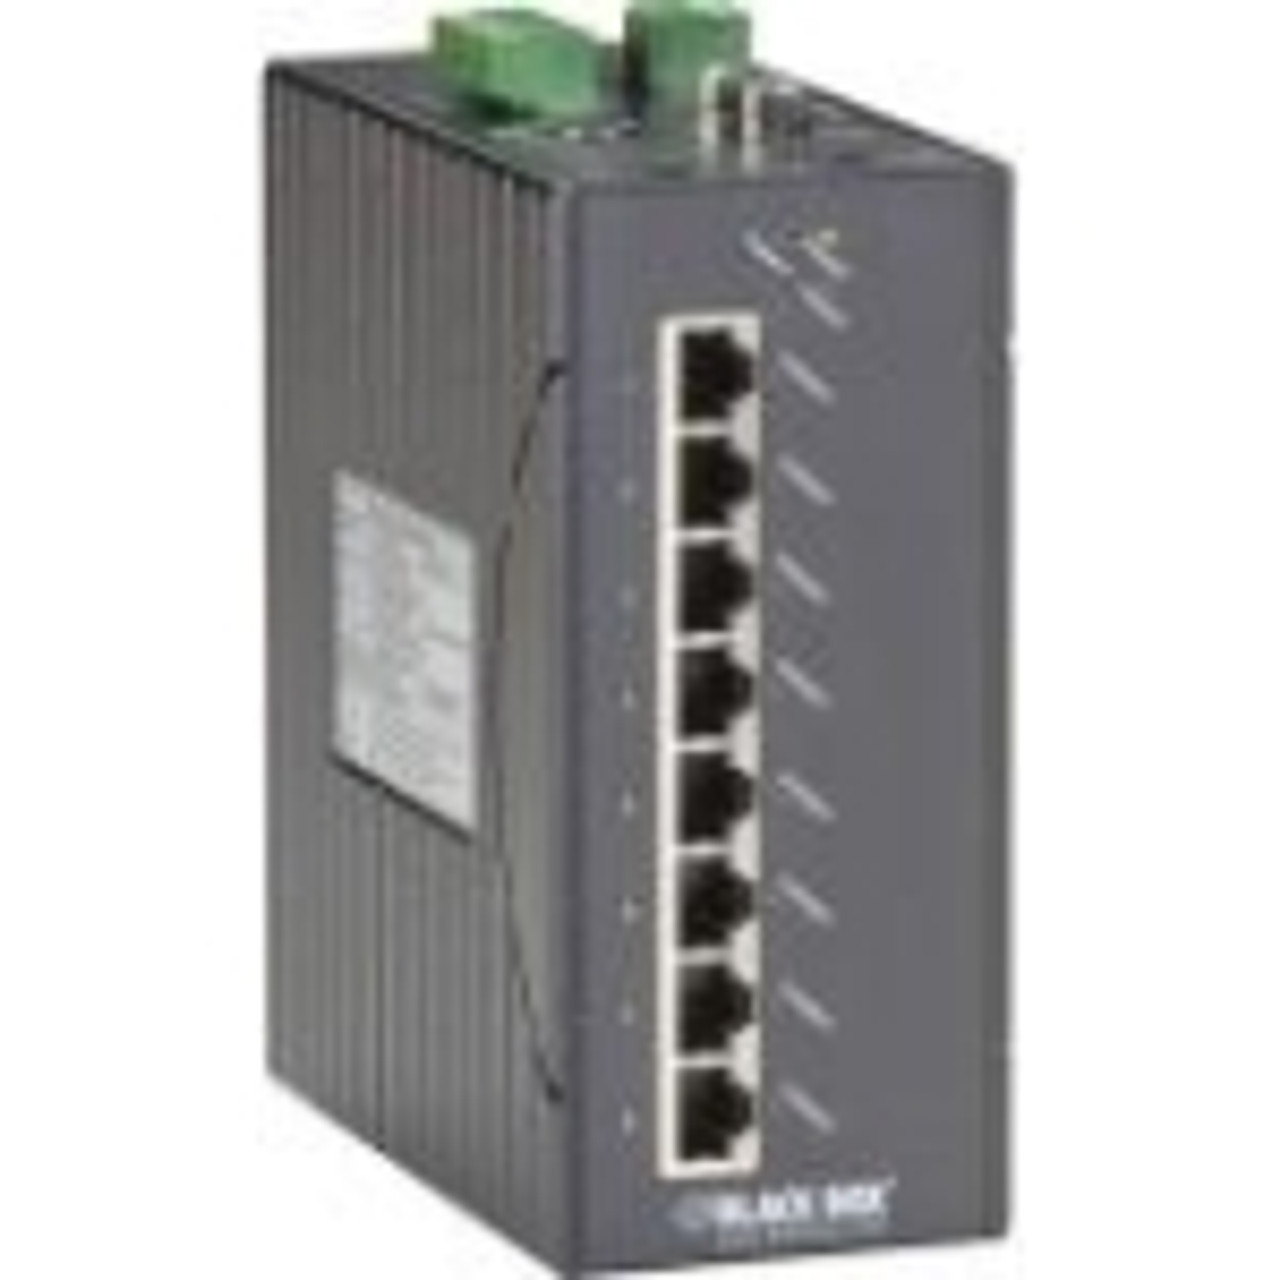 LEH1208A Black Box LEH1208A Ethernet Switch 8 Ports Manageable 10/100Base-T 8 x Network Twisted Pair Fast Ethernet 2 Layer Supported Rack-mountable,